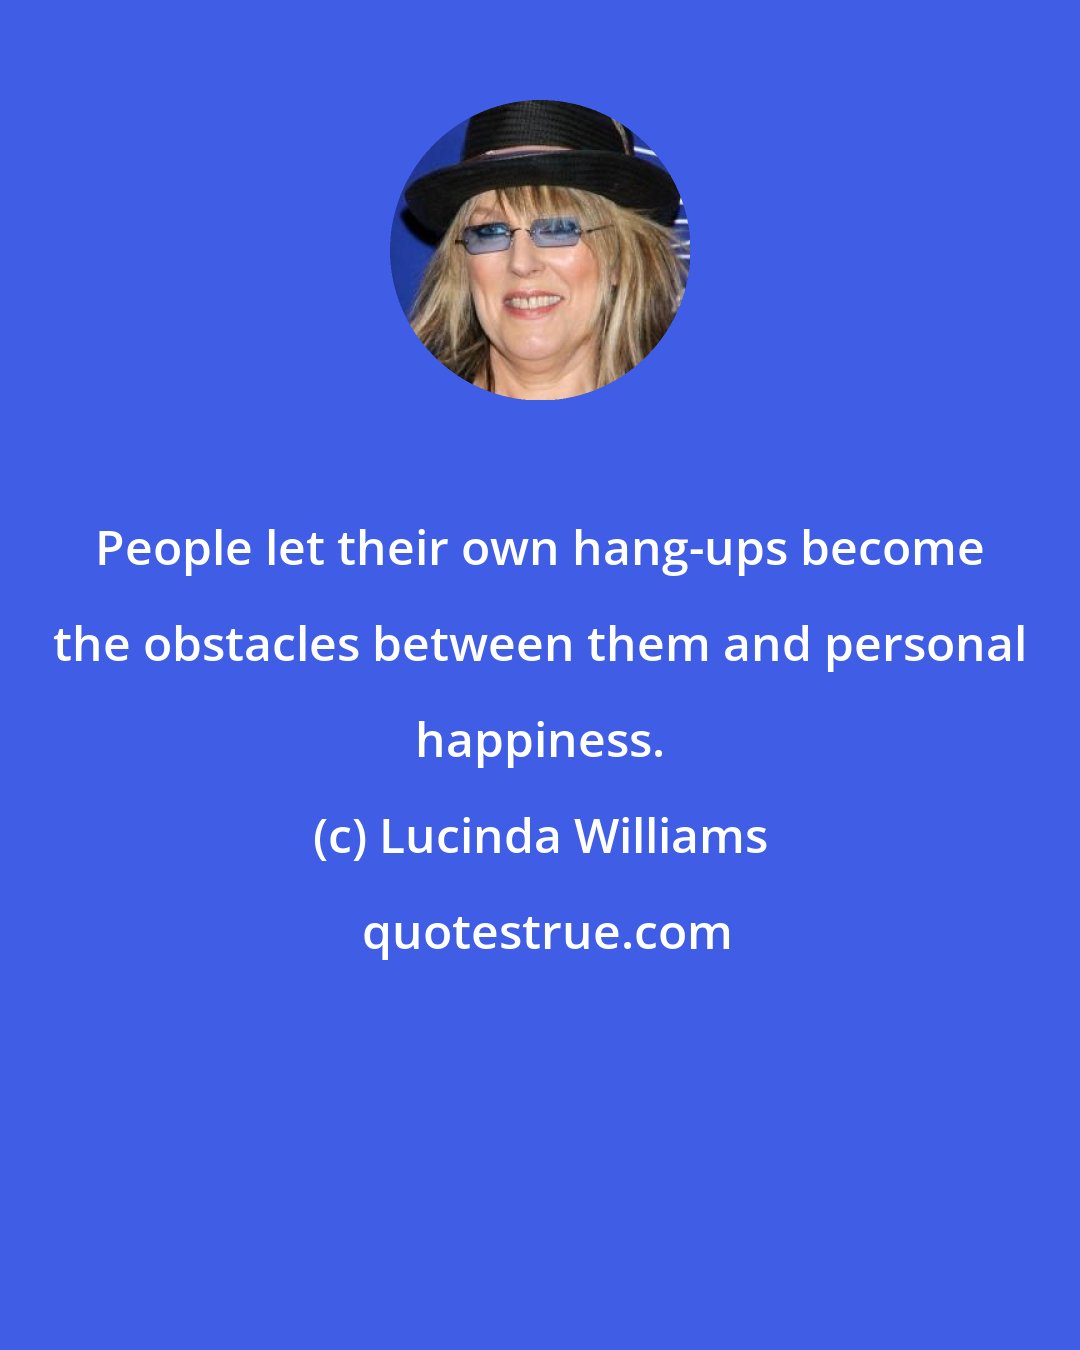 Lucinda Williams: People let their own hang-ups become the obstacles between them and personal happiness.